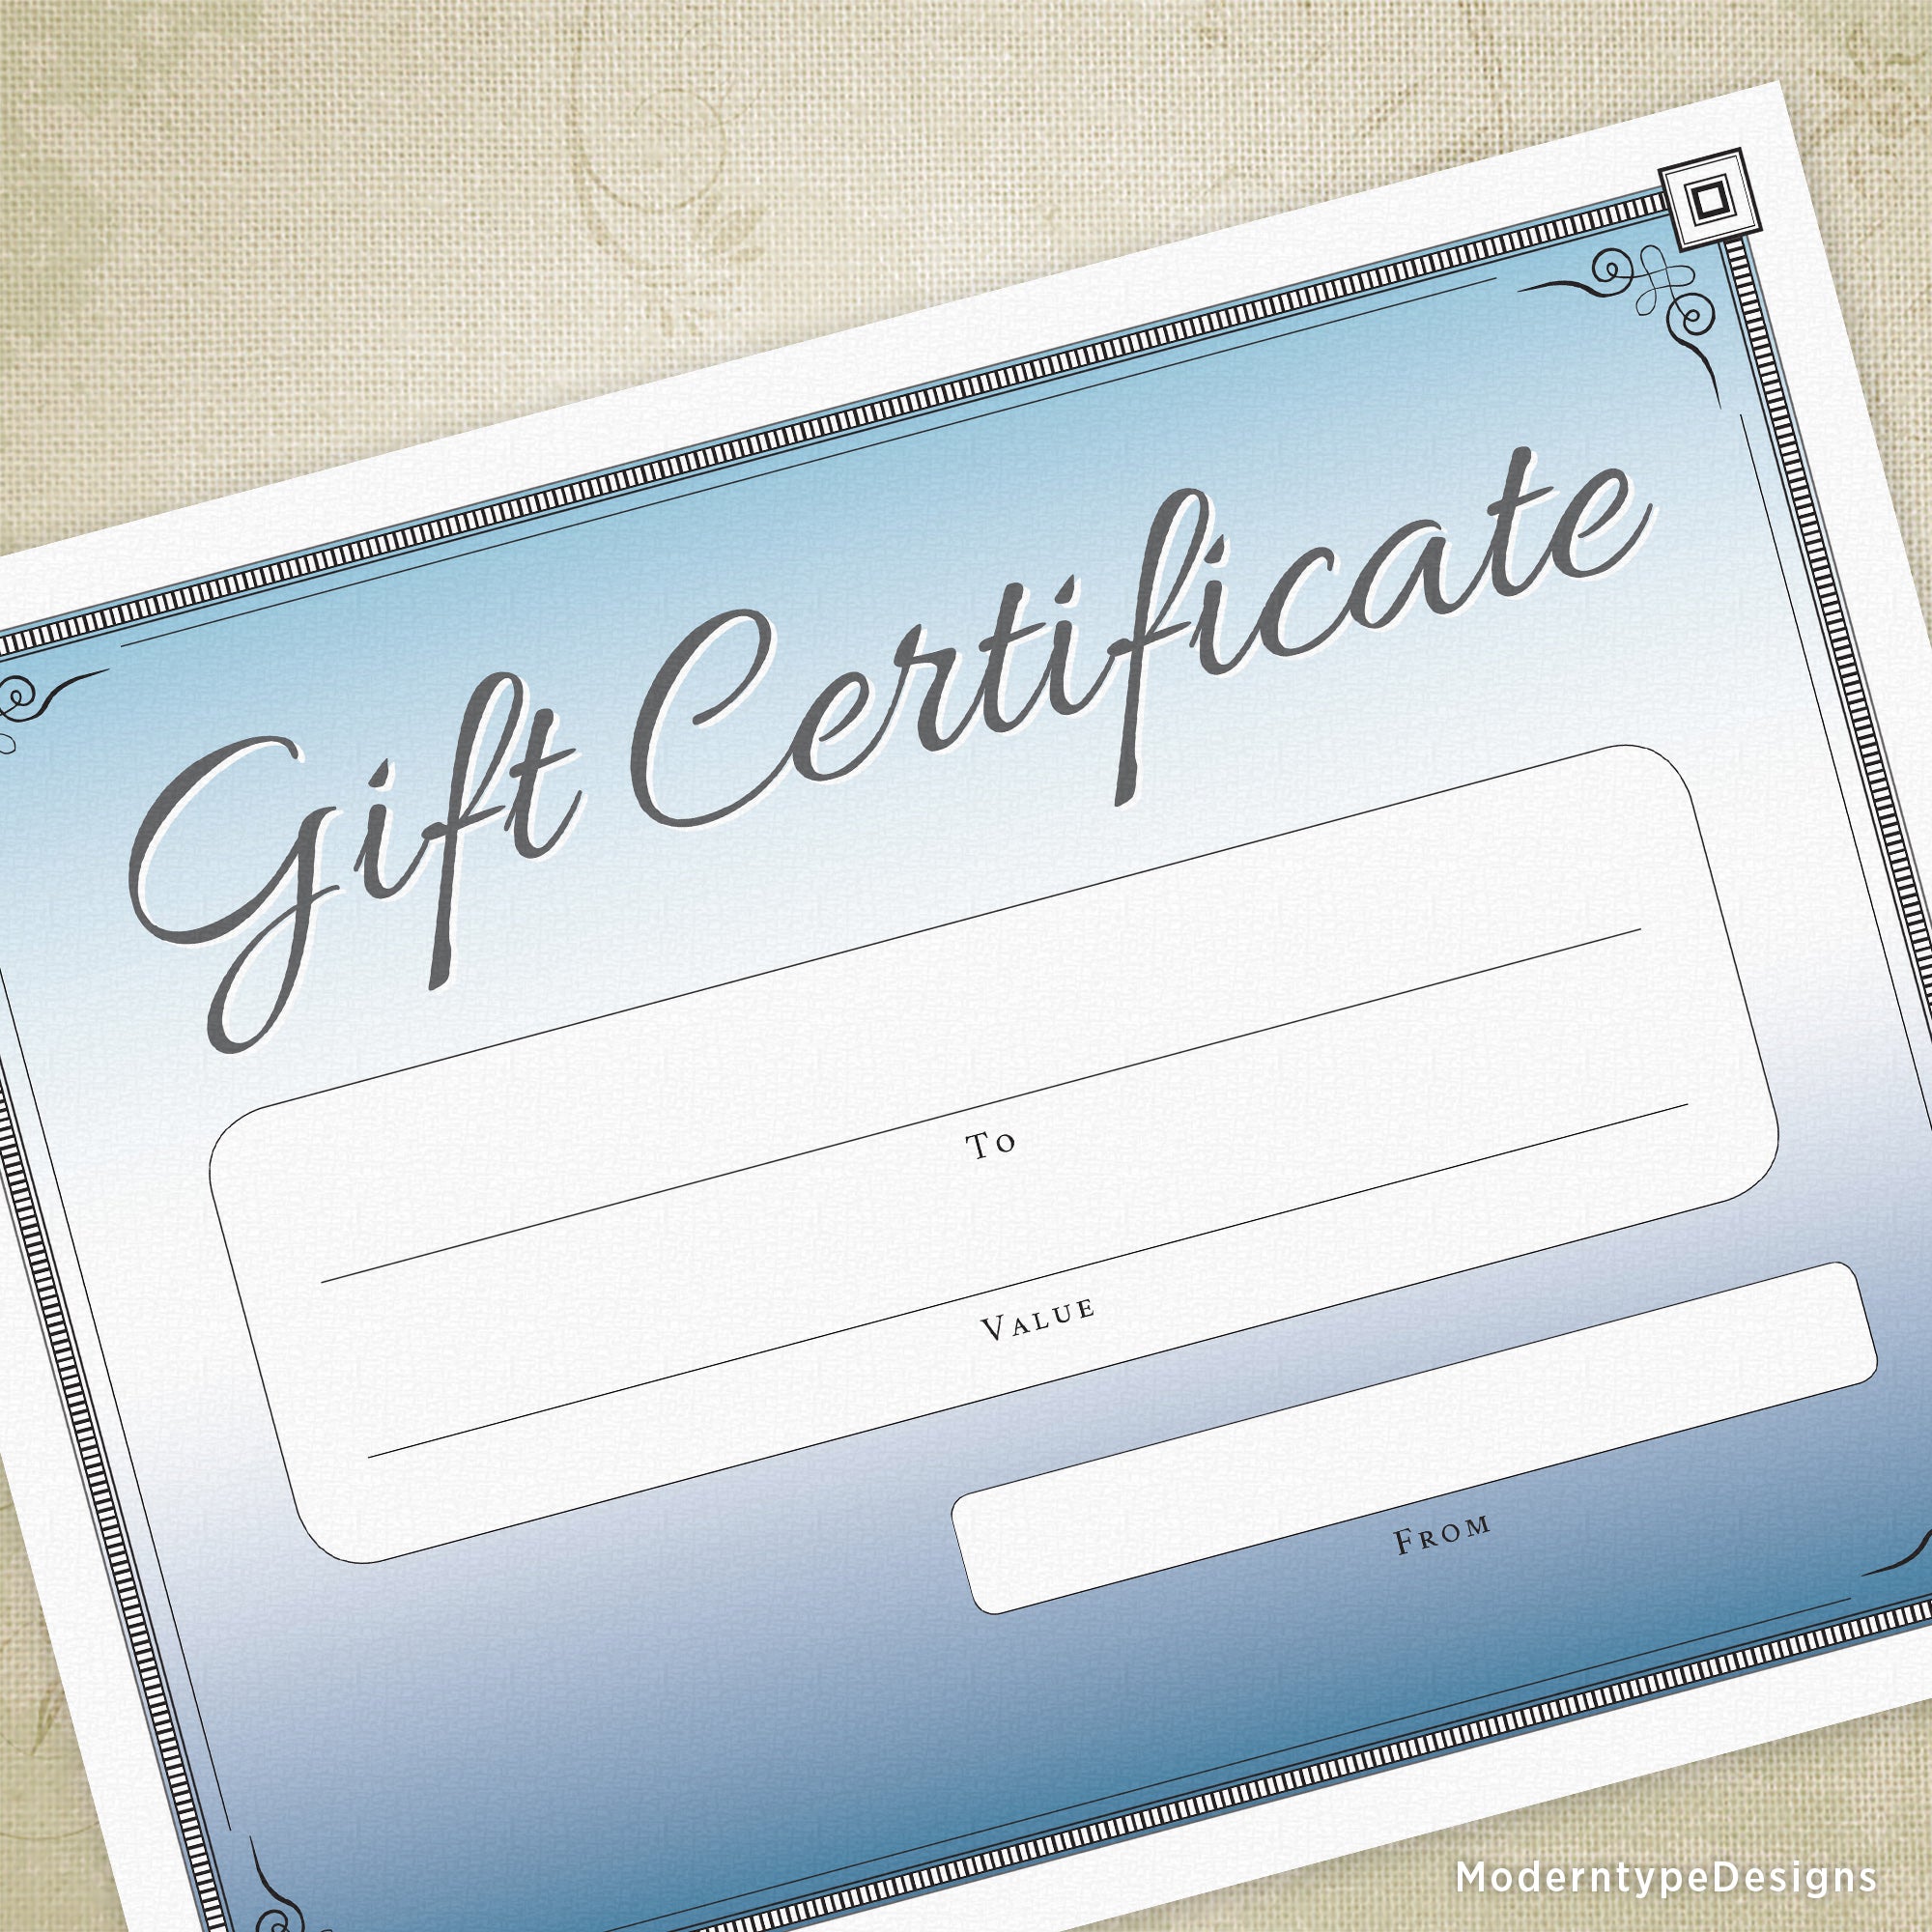 Gift Certificate Printable